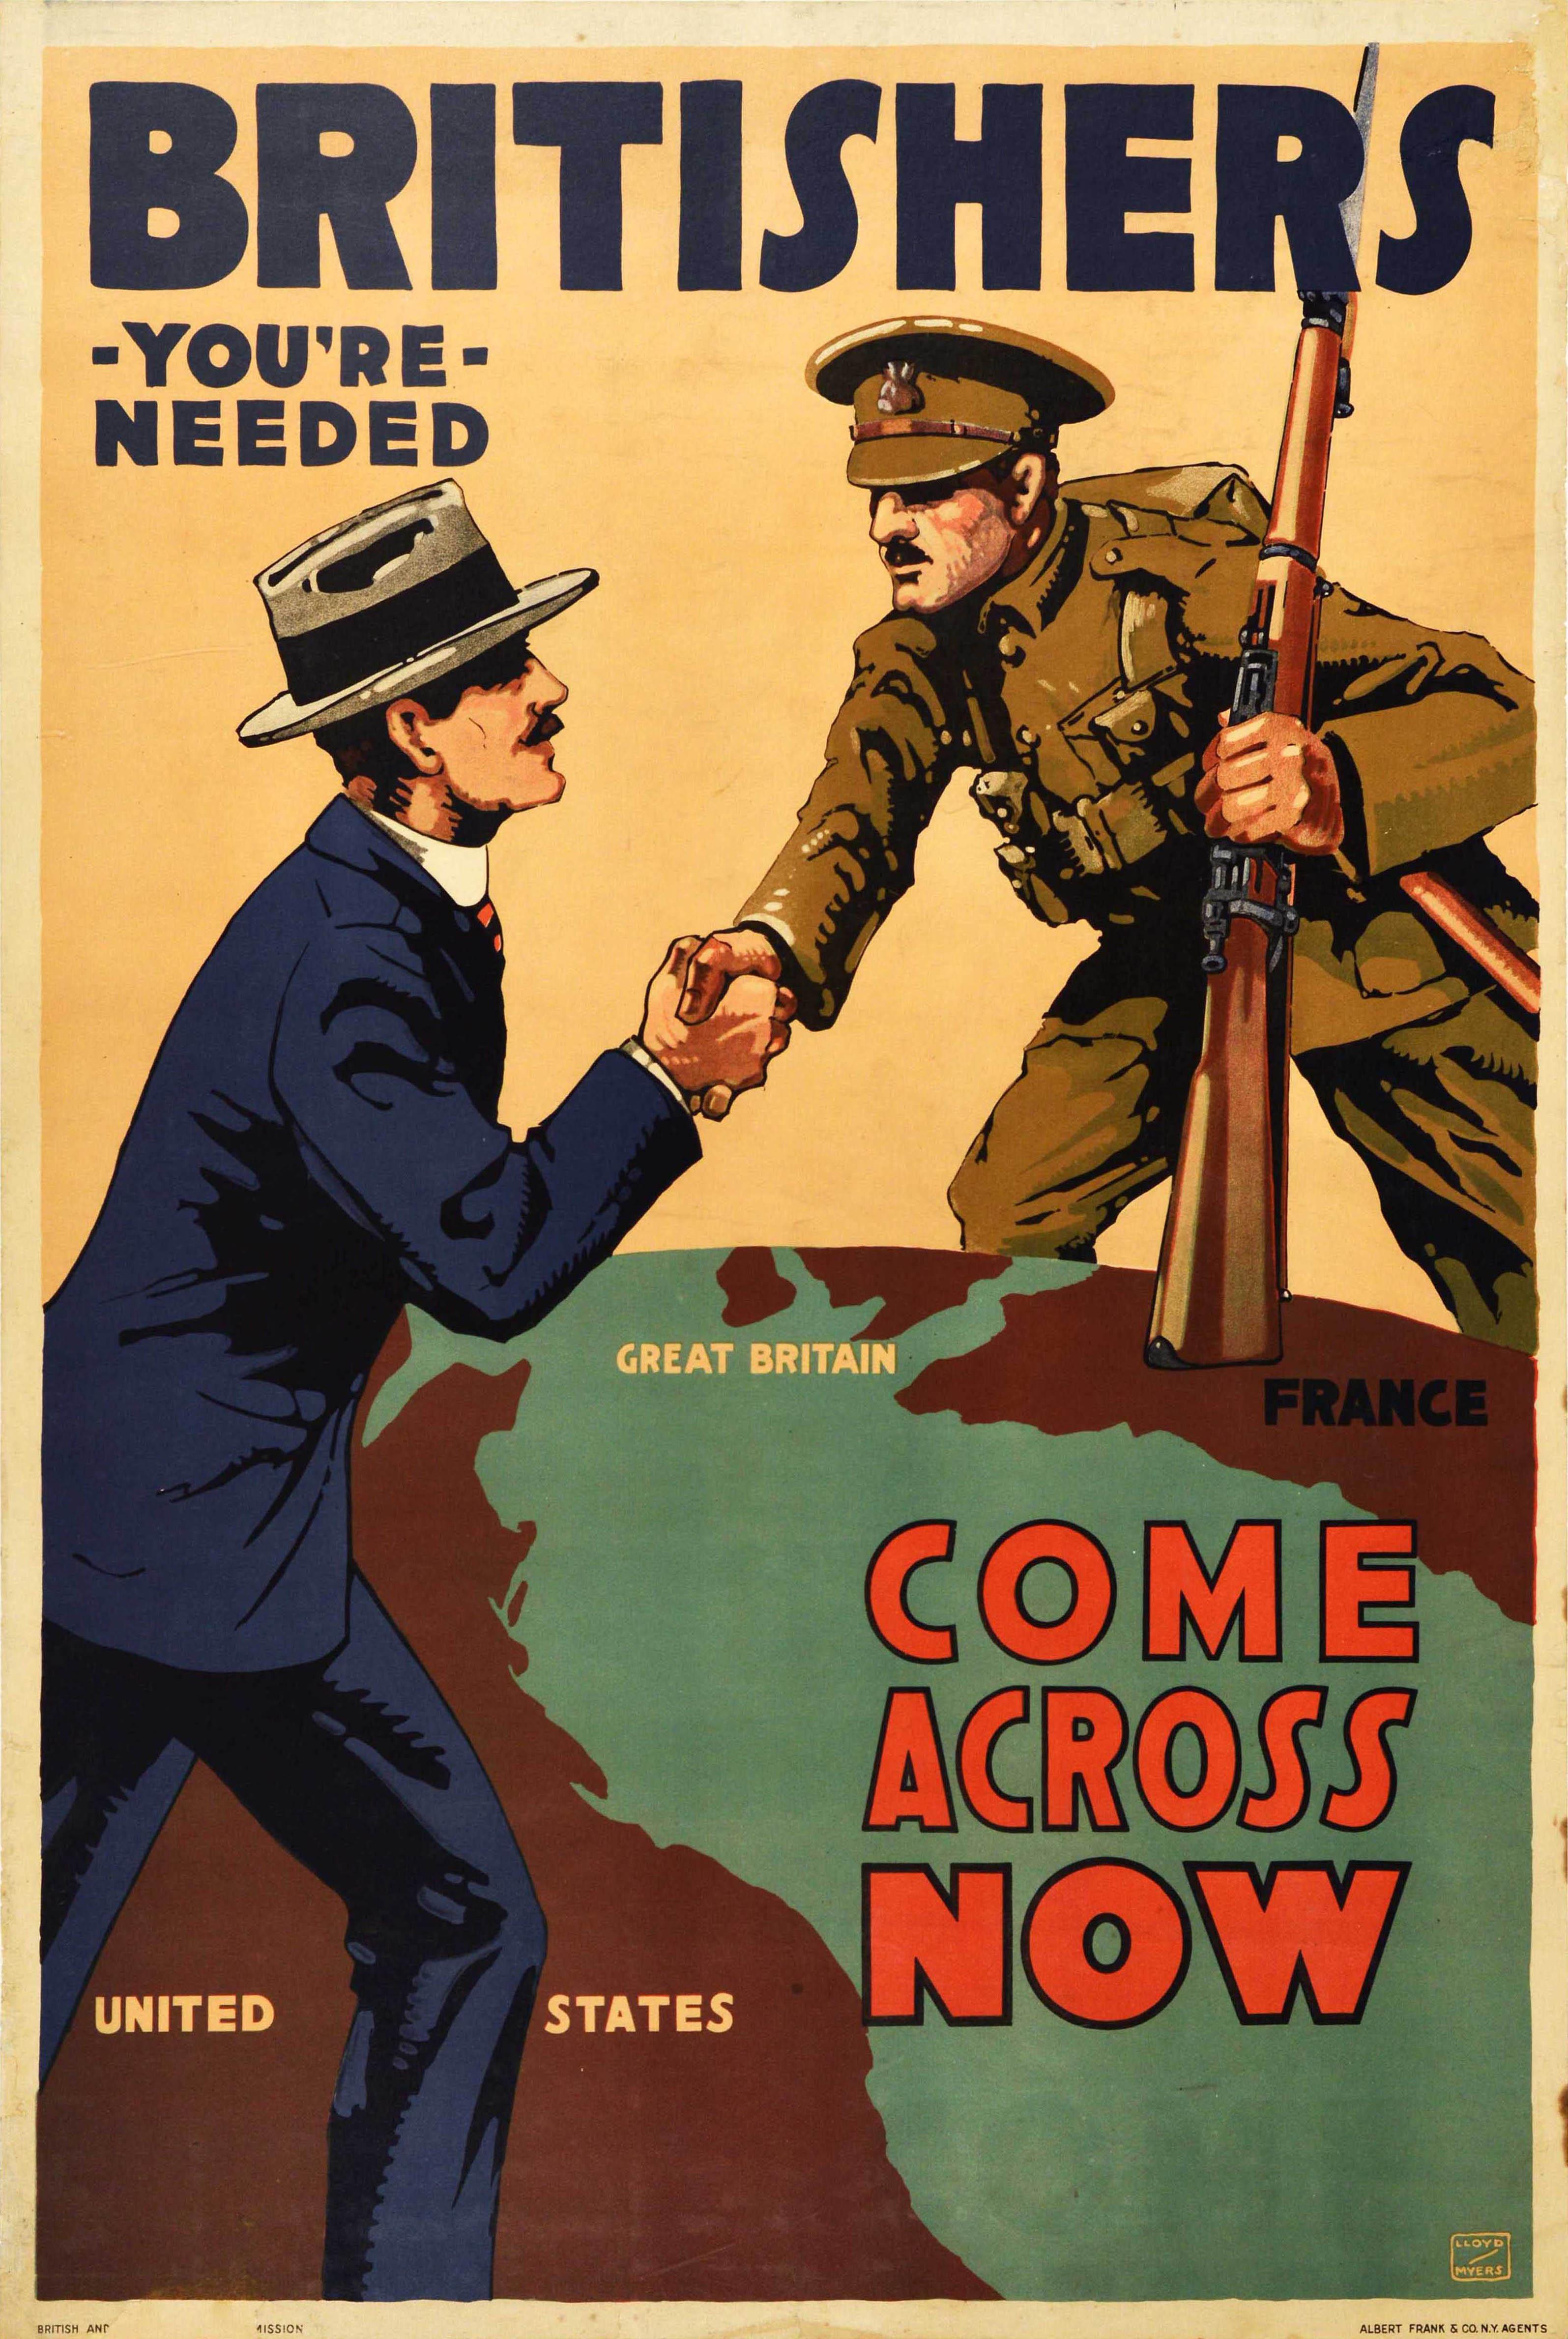 Lloyd Myers Print - Original Antique WWI Recruitment Poster Britishers You're Needed Come Across Now